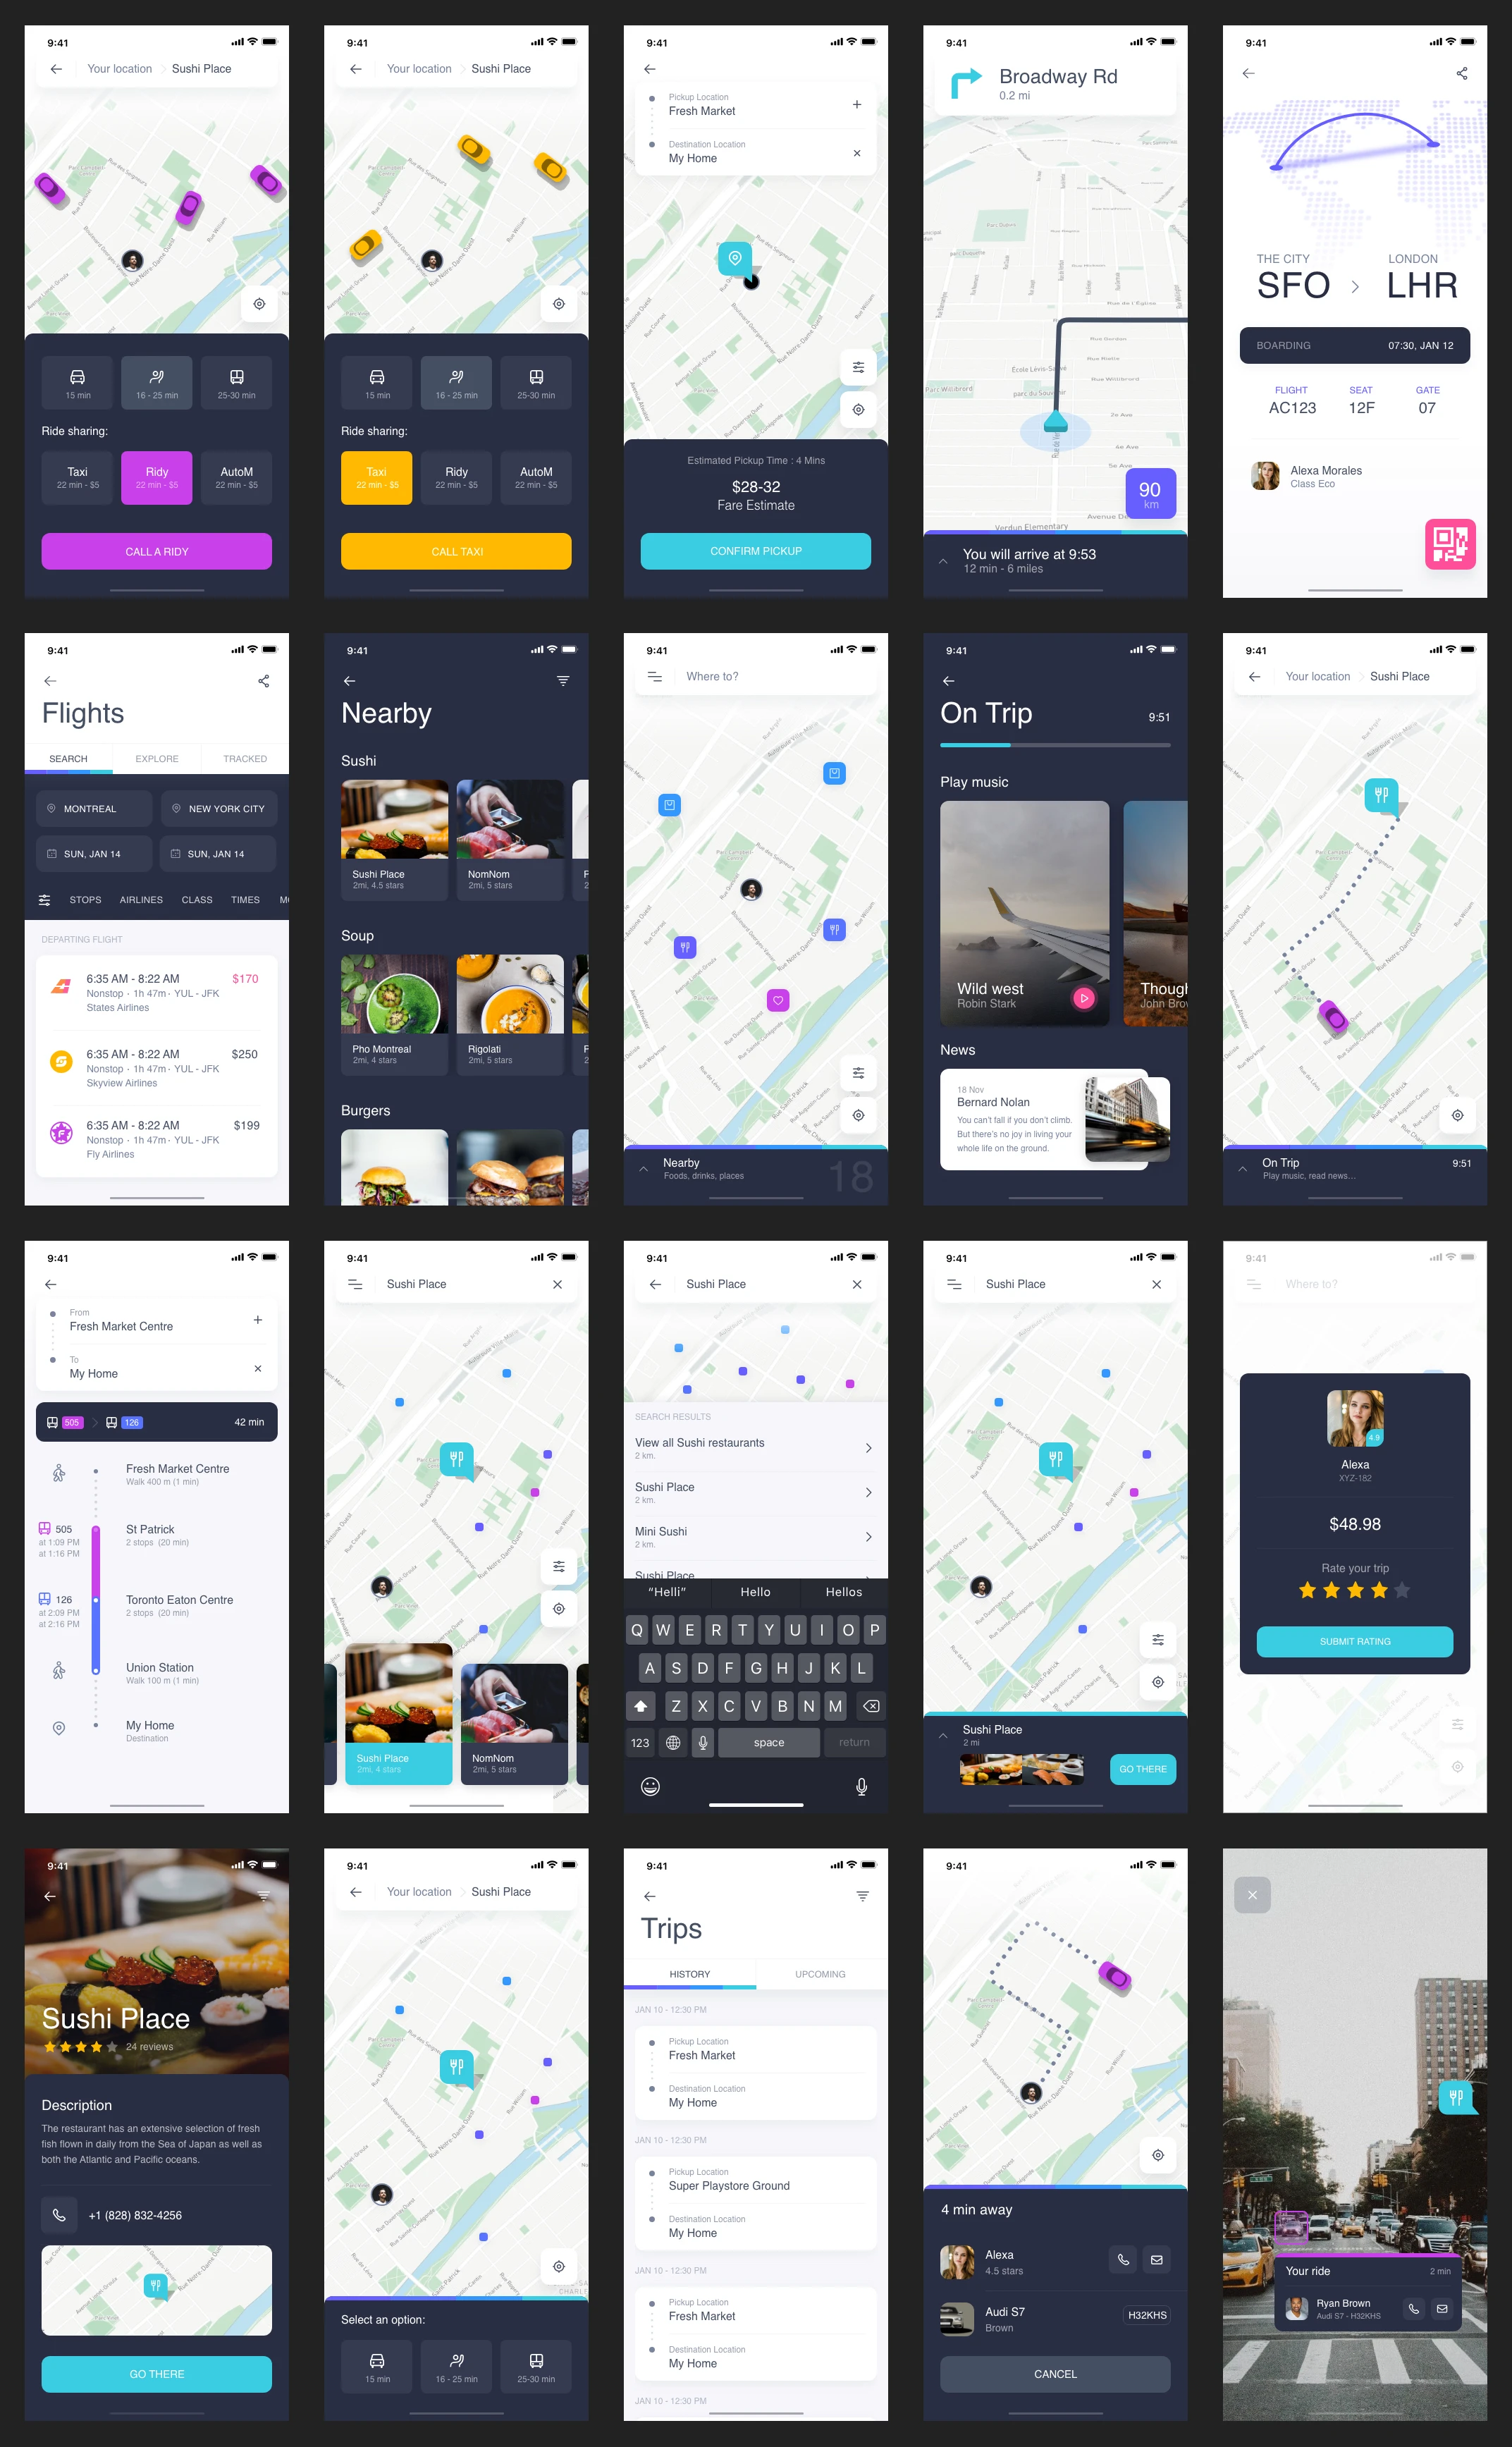 Navigo UI Kit for Adobe XD - Navigo is a free iOS UI Kit made for Adobe XD. It includes more than 60 screens organized in 6 categories and designed with a modern and colorful style.